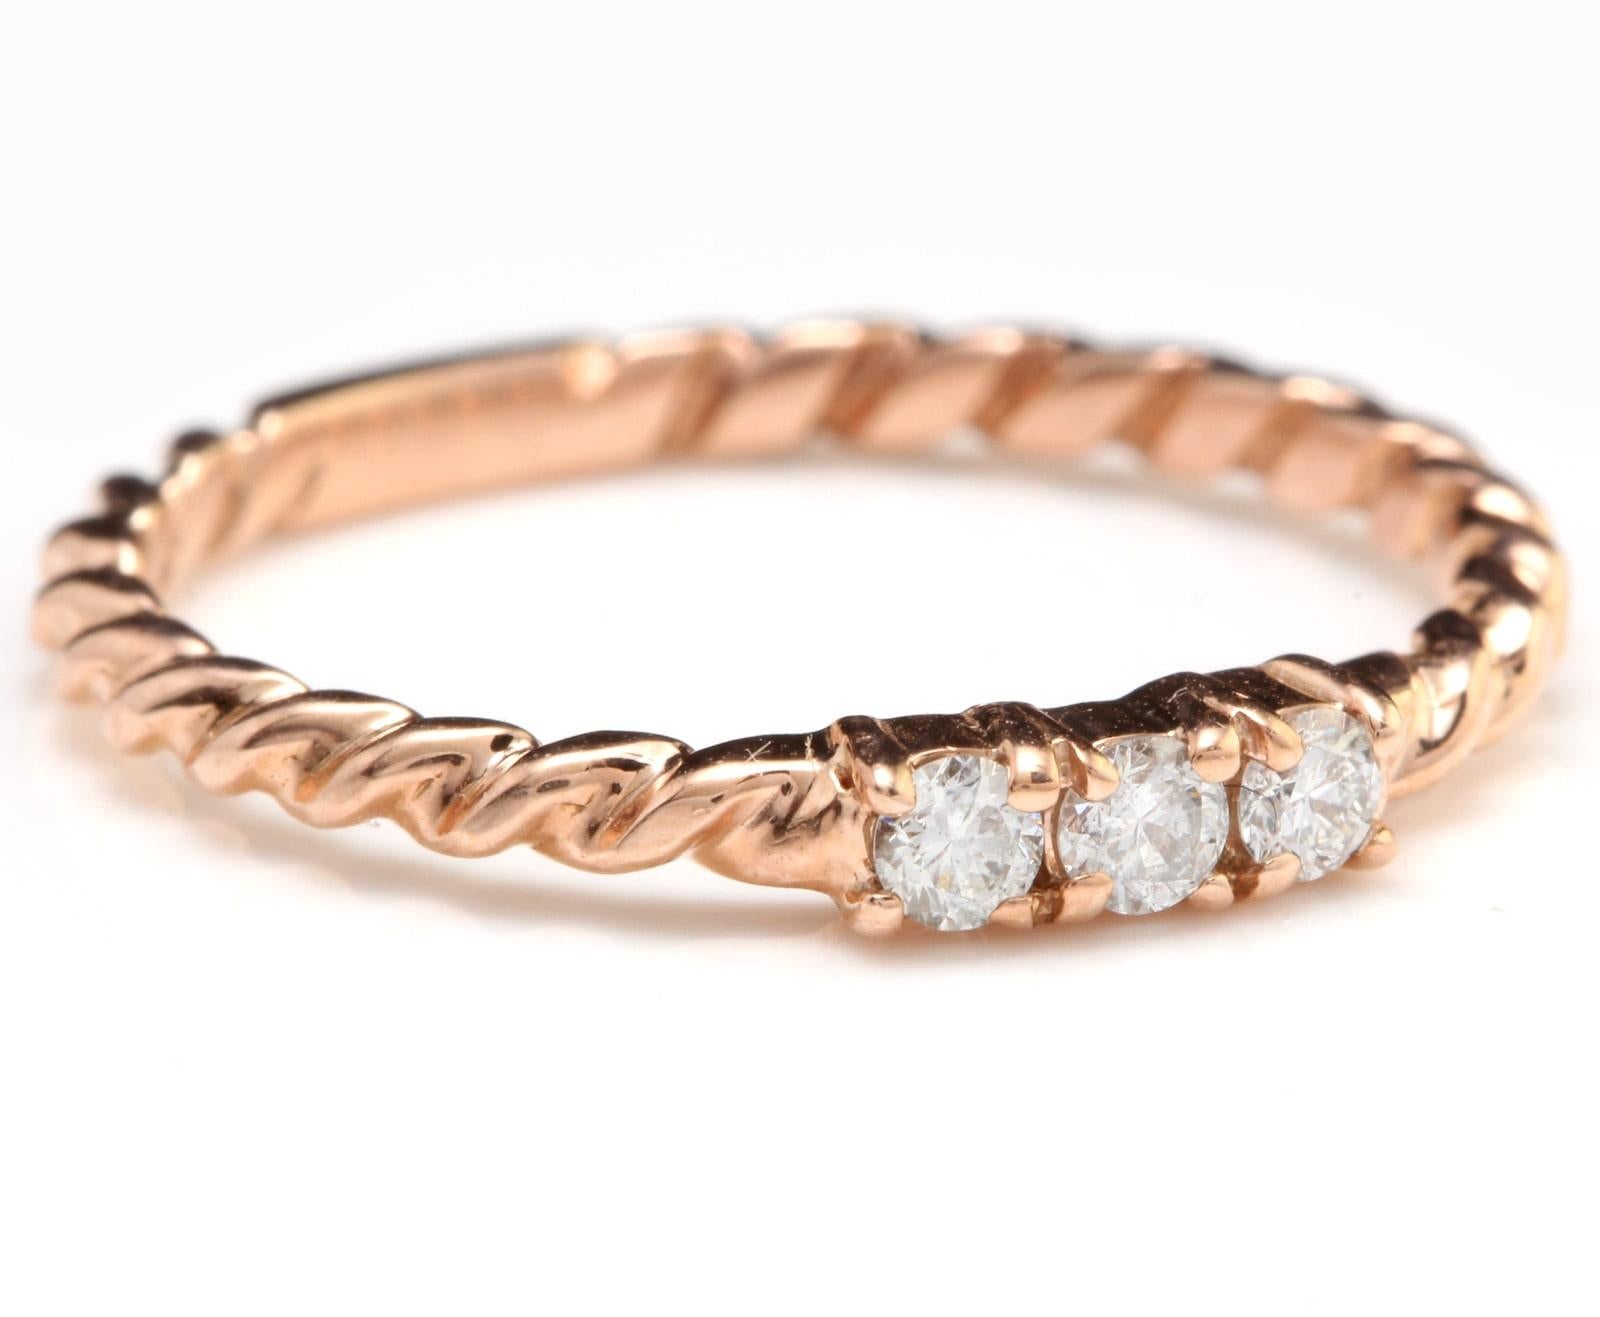 Splendid .15 Carats Natural Diamond 14K Solid Rose Gold Ring

Stamped: 14K

Total Natural Round Cut Diamonds Weight: Approx. 0.15 Carats (color G-H / Clarity SI1-SI2)

The width of the ring is: 2.8mm

Ring size: 7 (we offer free re-sizing upon